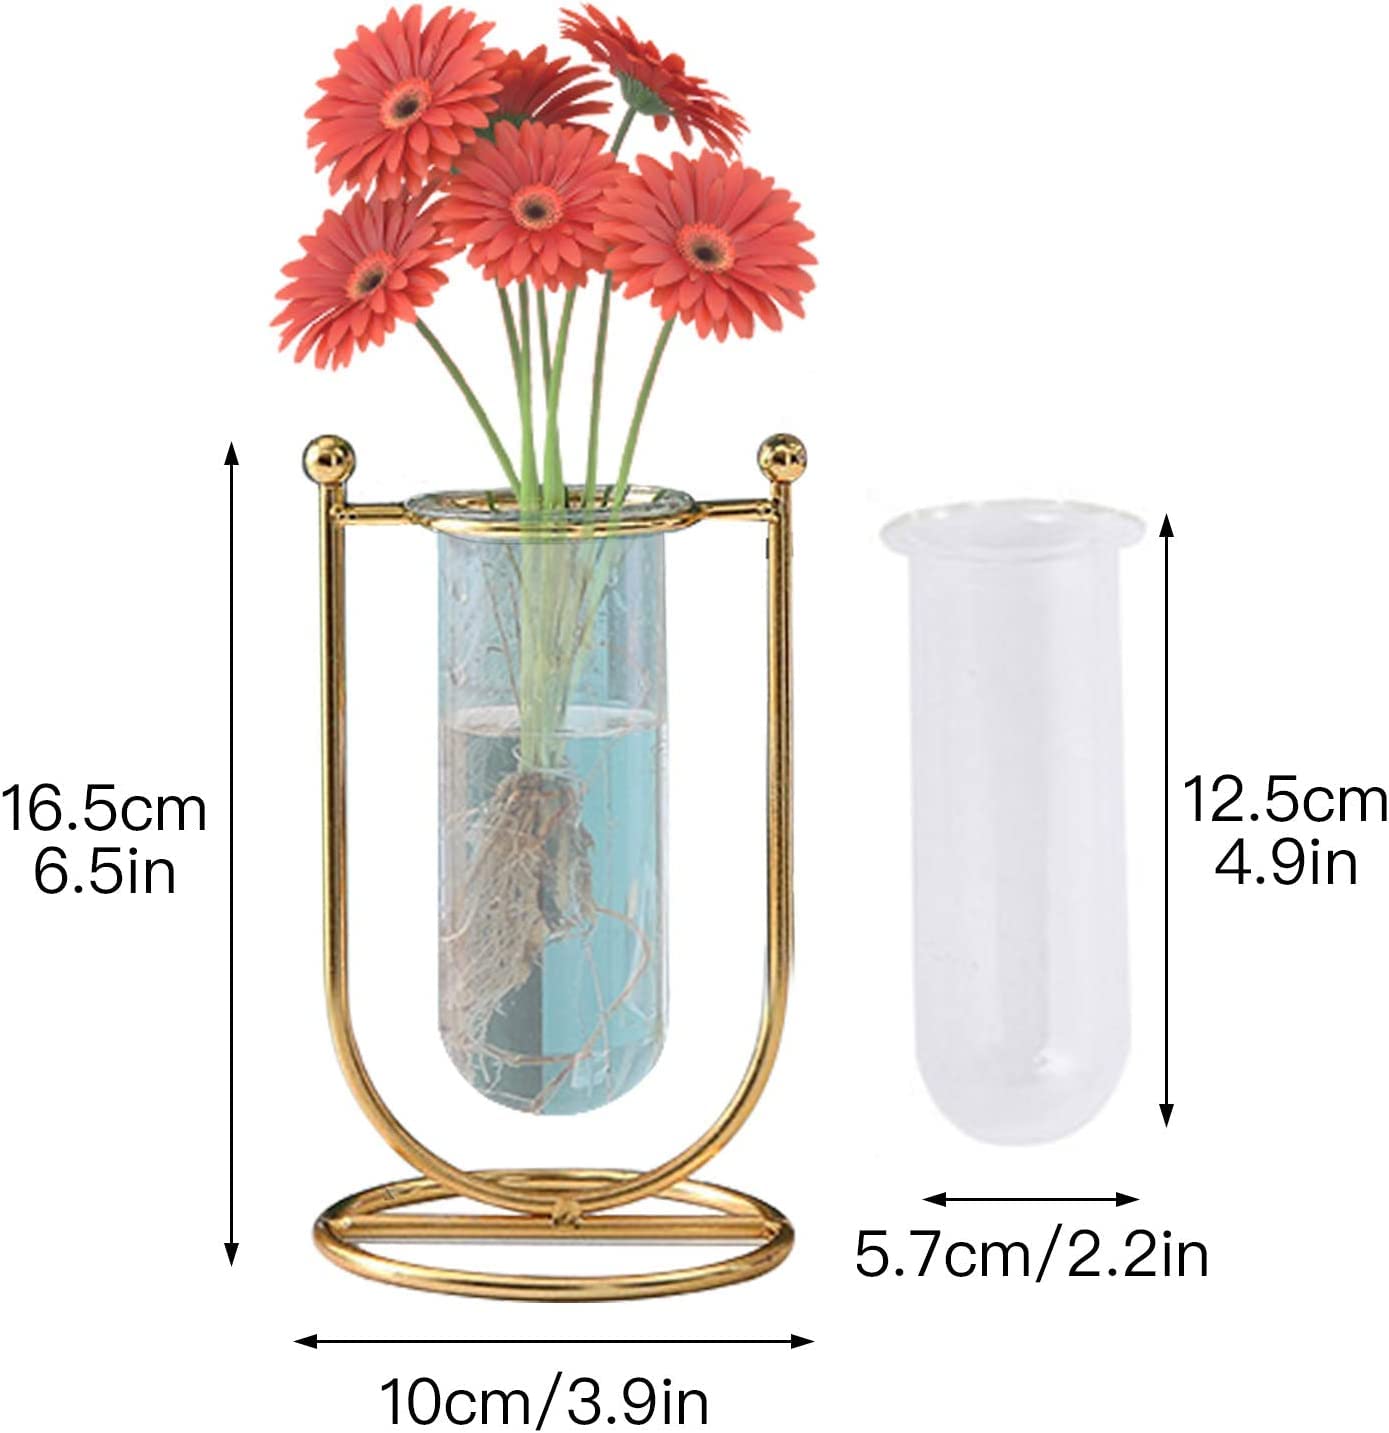 Desktop Glass Planter Hydroponics Vase Glass Propagation Station with Modern Creative Geometric Metal Frame Test Tube Vase for Home Office Decor Table Top (Set of 2)